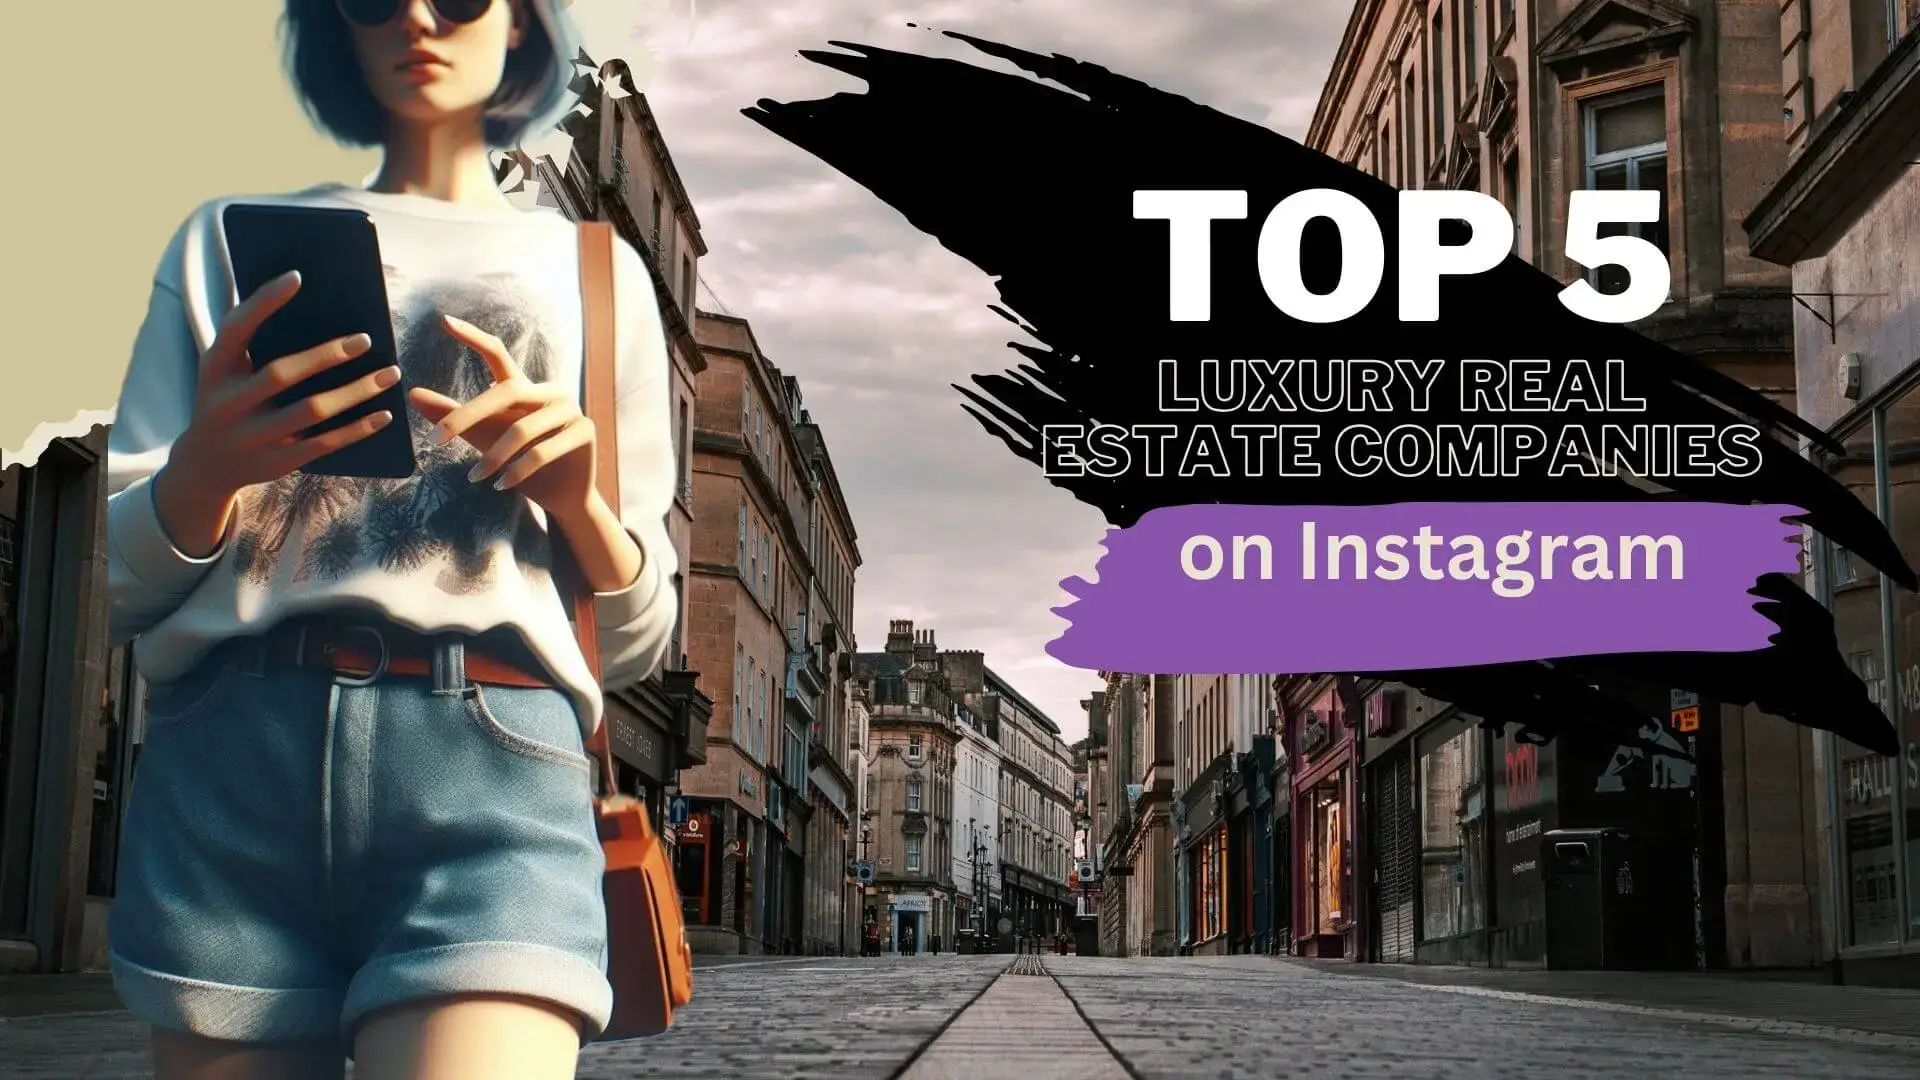 Top 5 Luxury Real Estate Companies to follow on Instagram